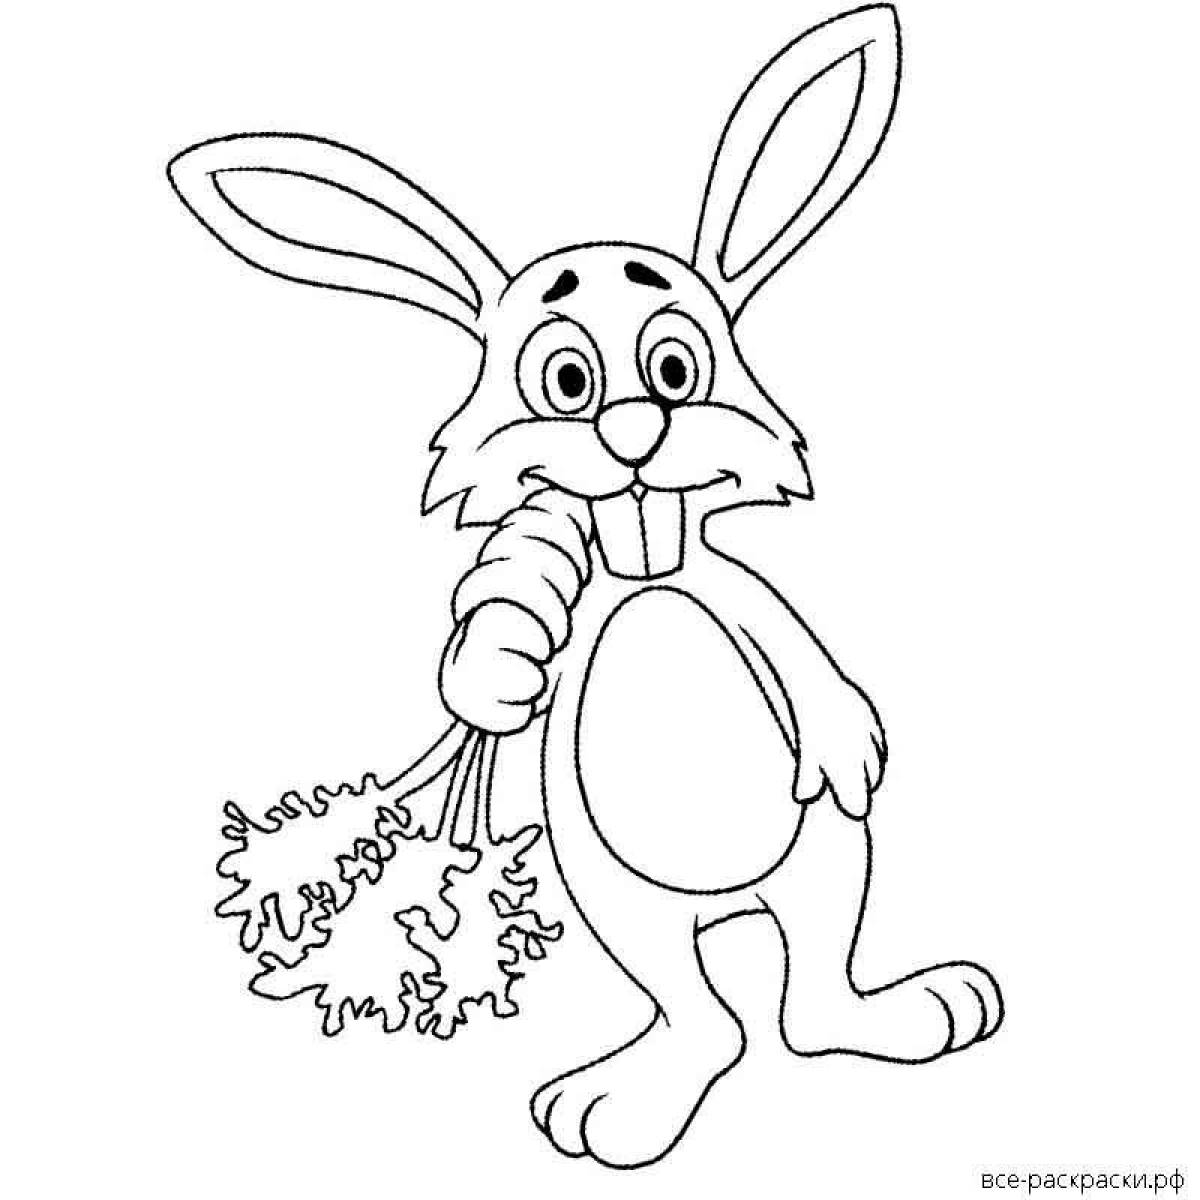 Relaxing Bunny Coloring Game